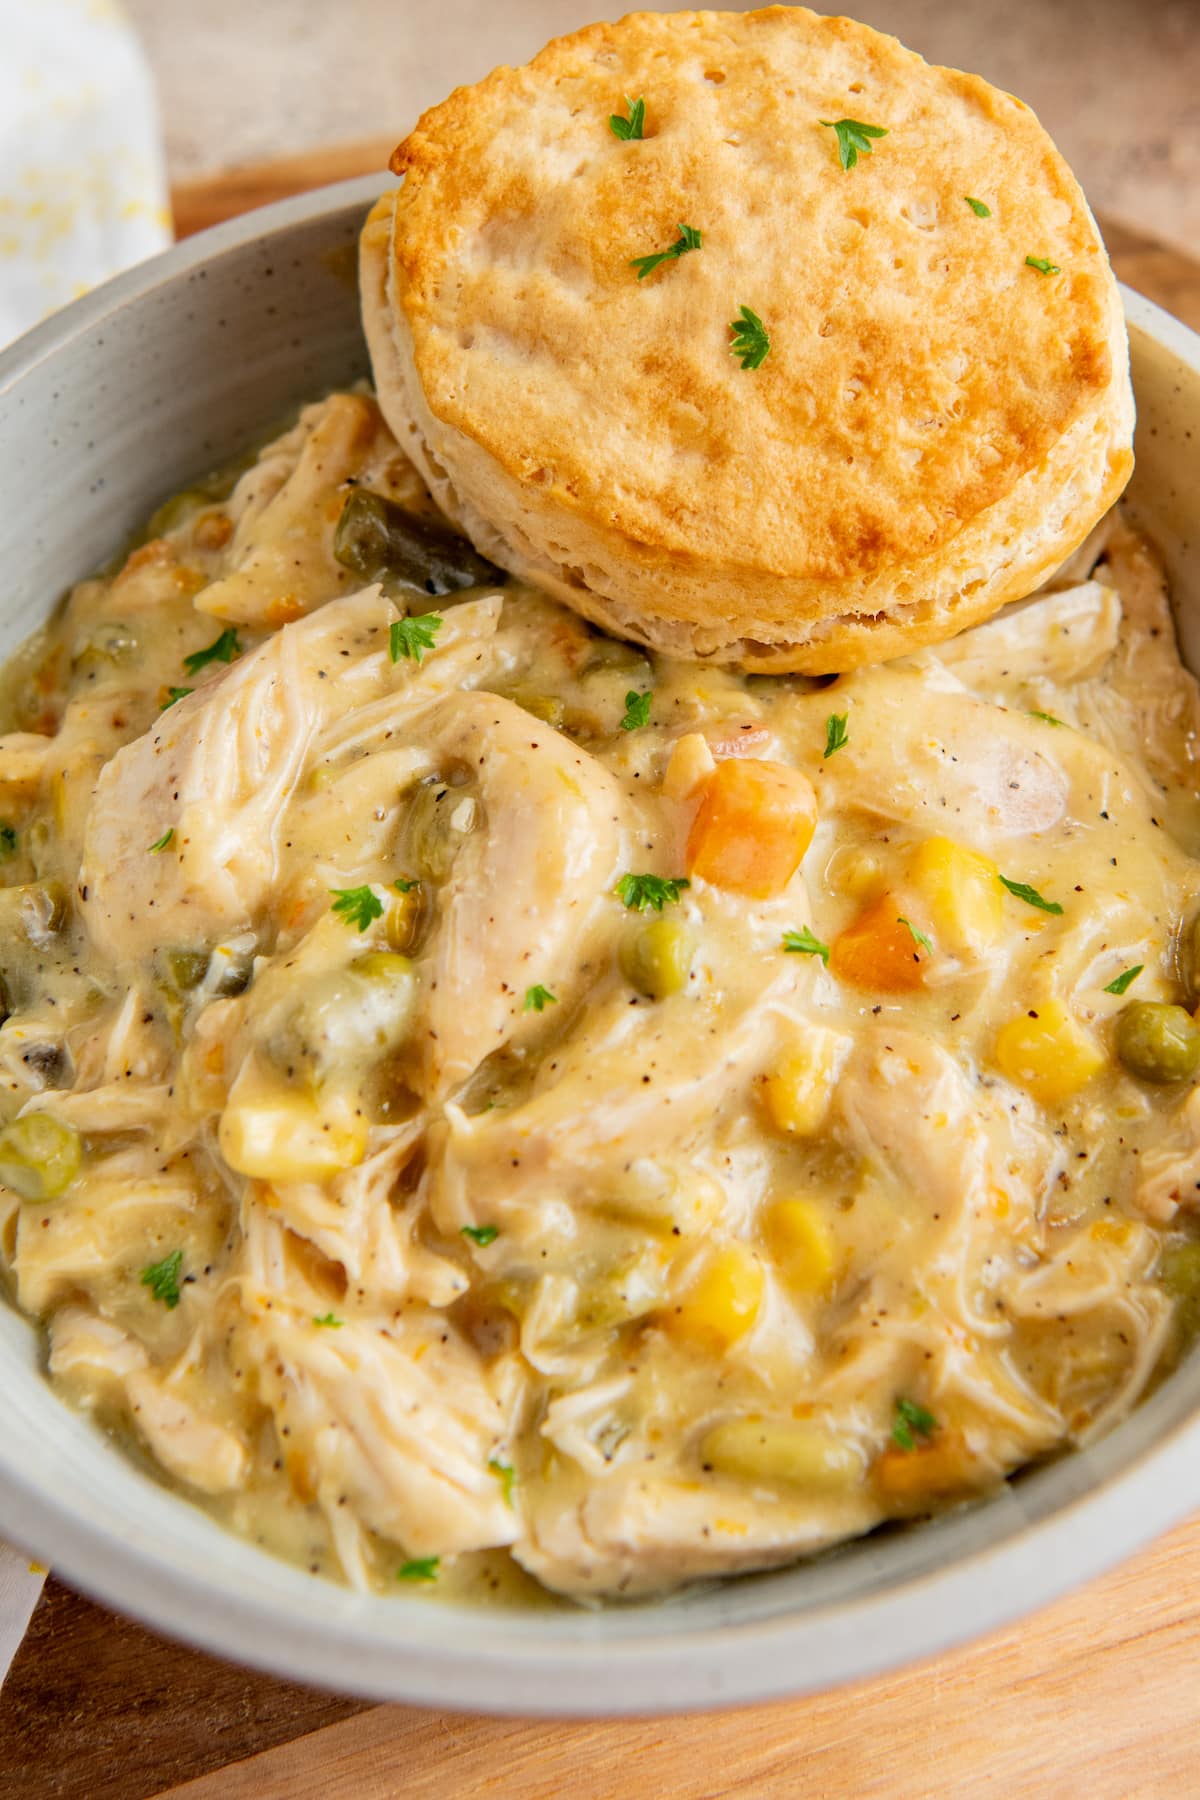 Close up of a bowl of chicken pot pie filling with a biscuit.